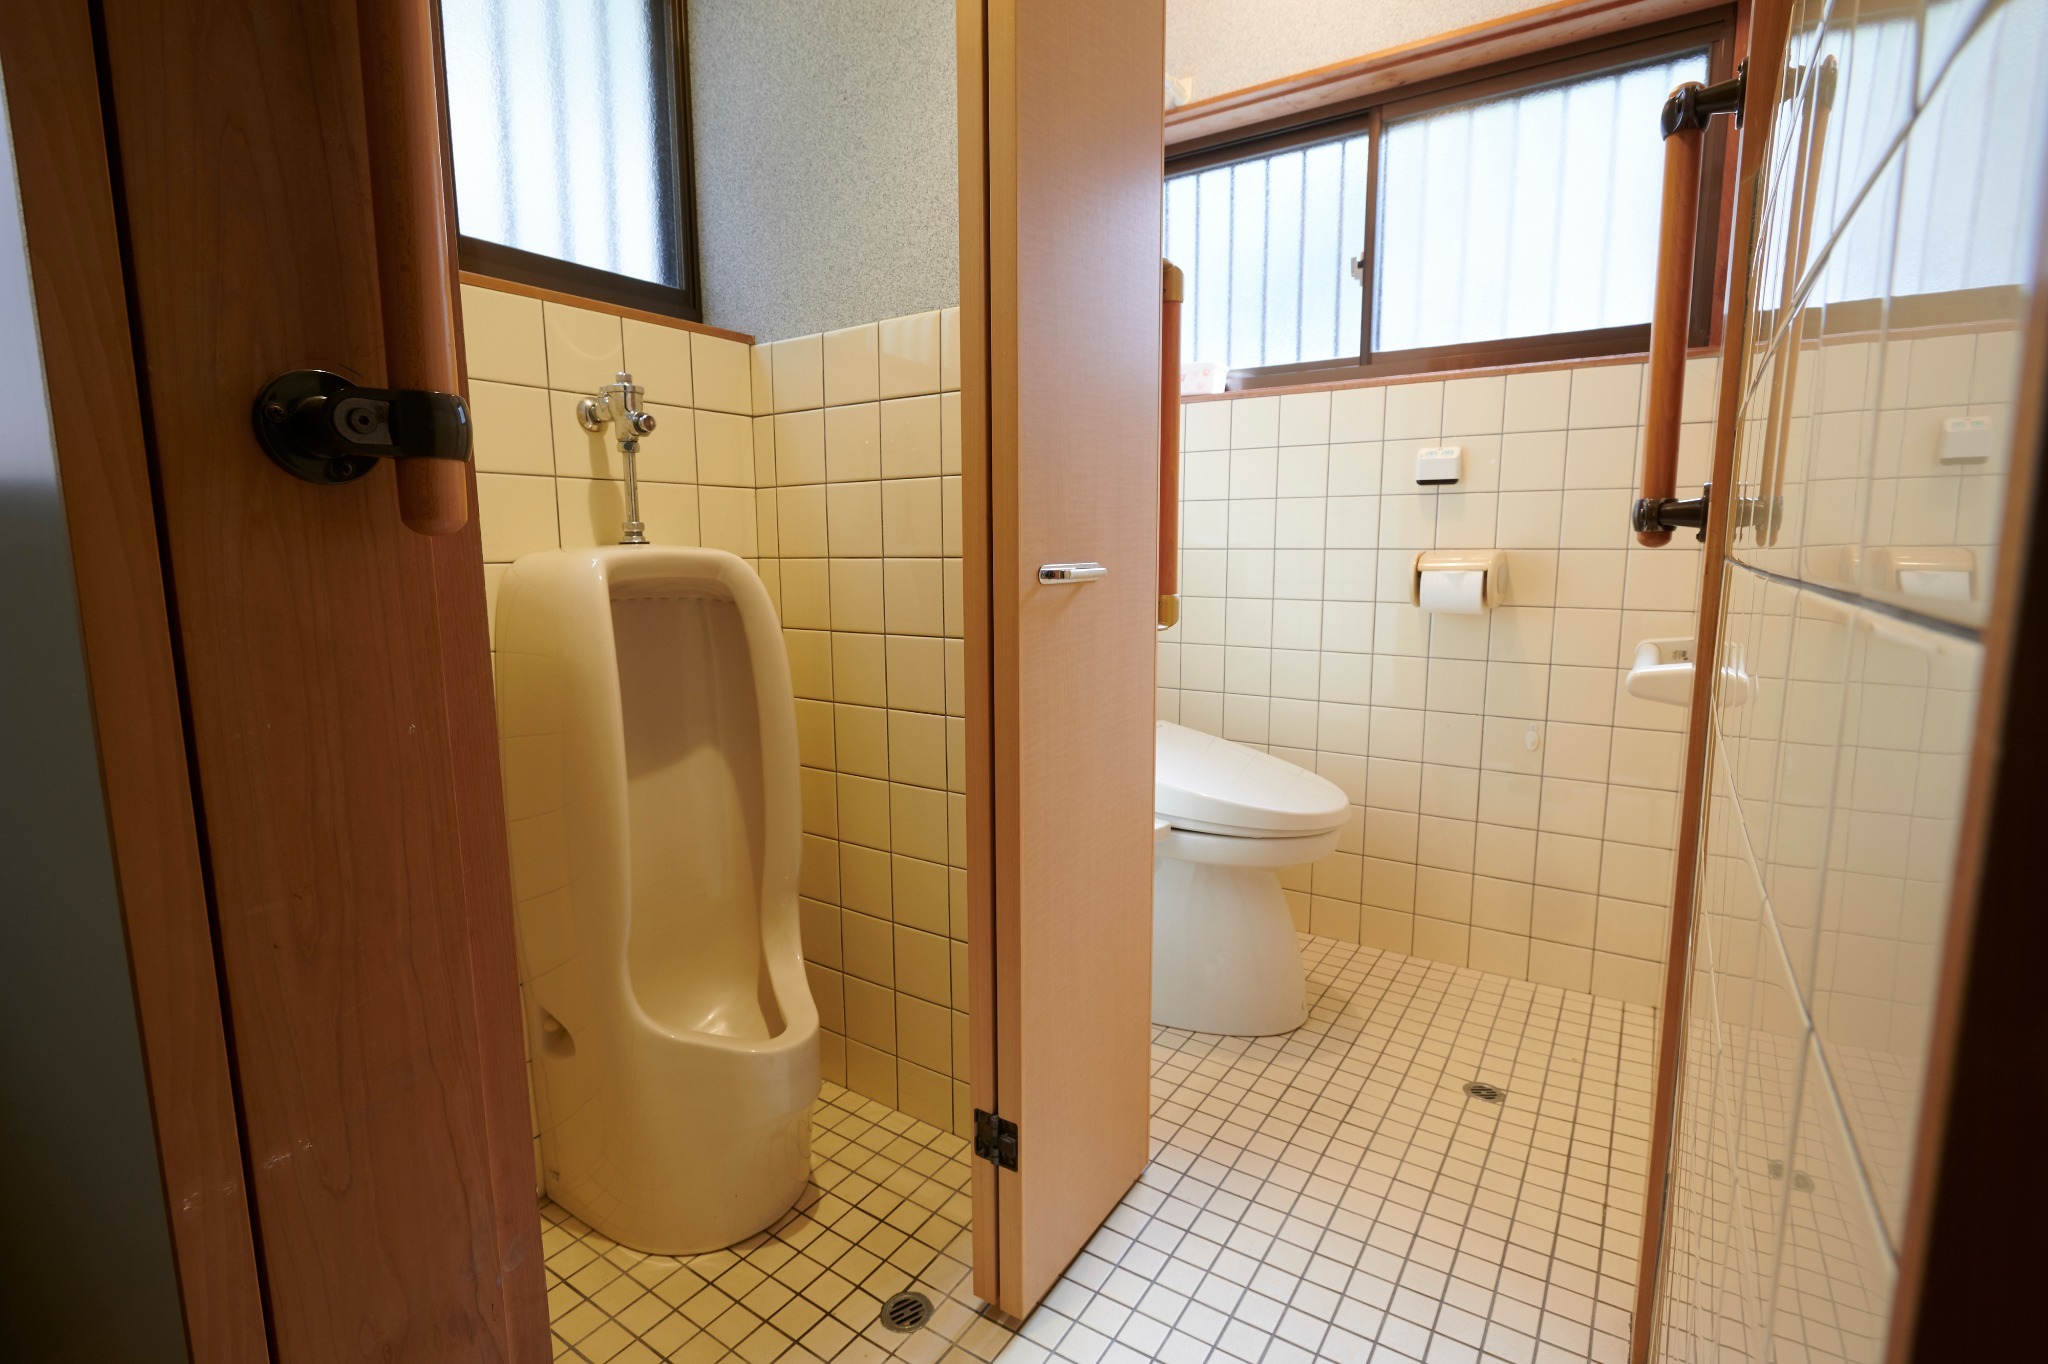 This is the toilet. トイレです。男性用が分かれており、清潔です。